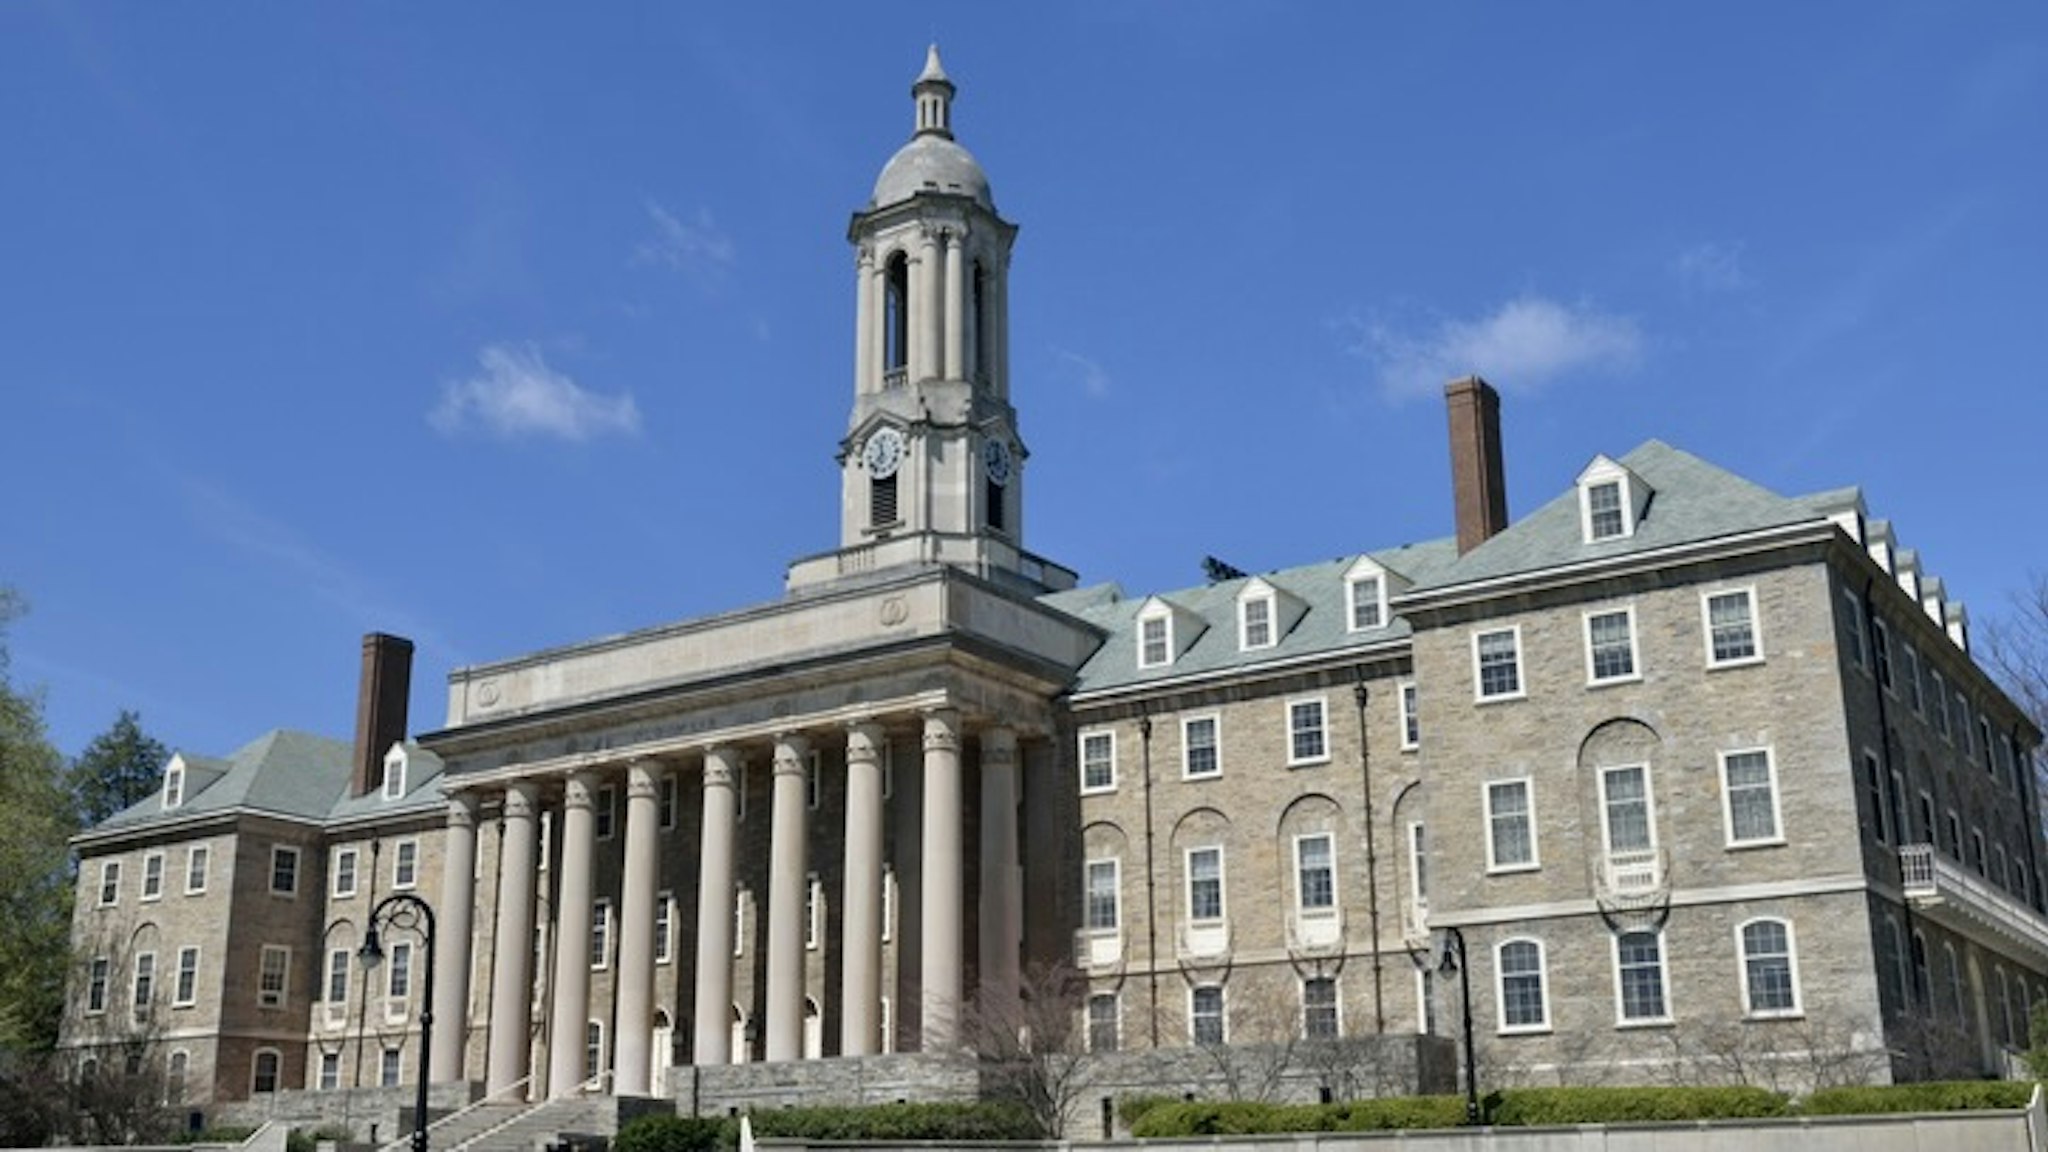 Old Main in Penn State - stock photo Old Main building in the main campus of Pennsylvania State University, State College, Pennsylvania, USA aimintang via Getty Images